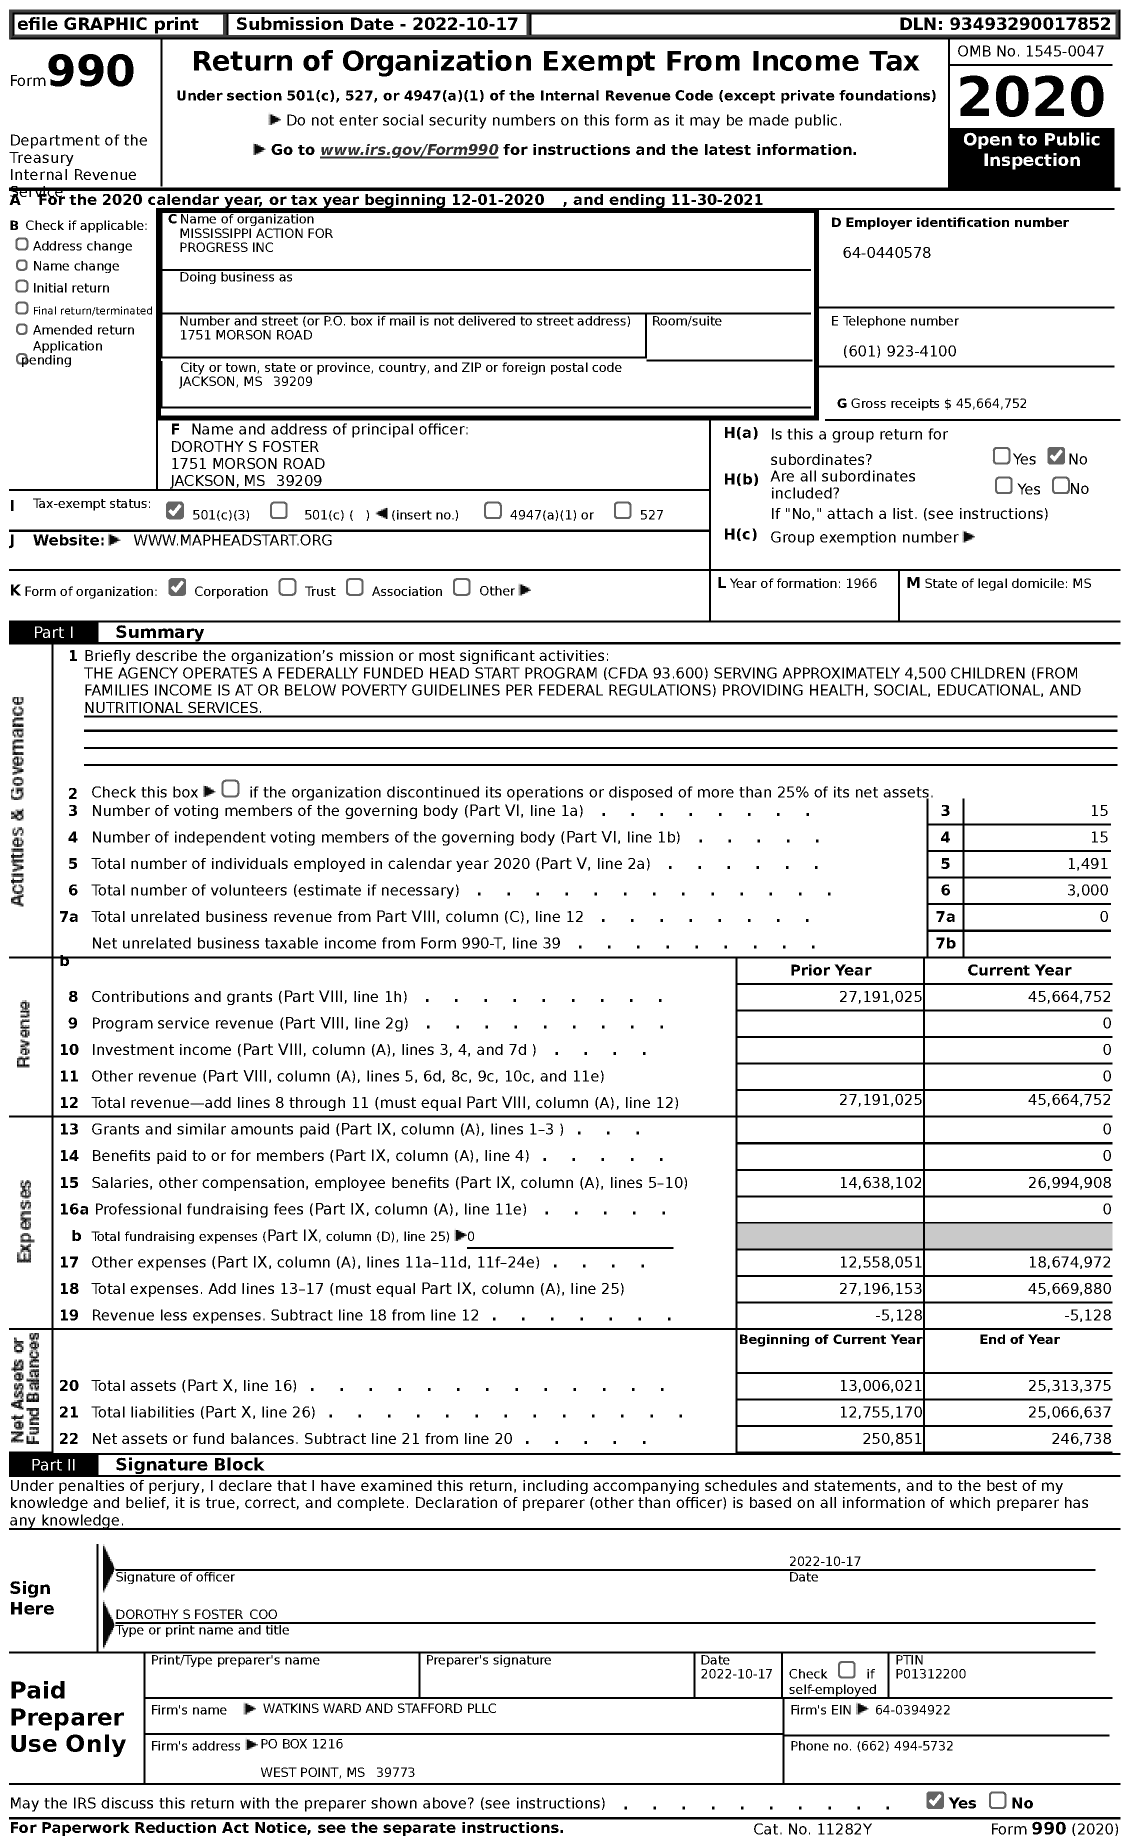 Image of first page of 2020 Form 990 for Mississippi Action for Progress (MAP)